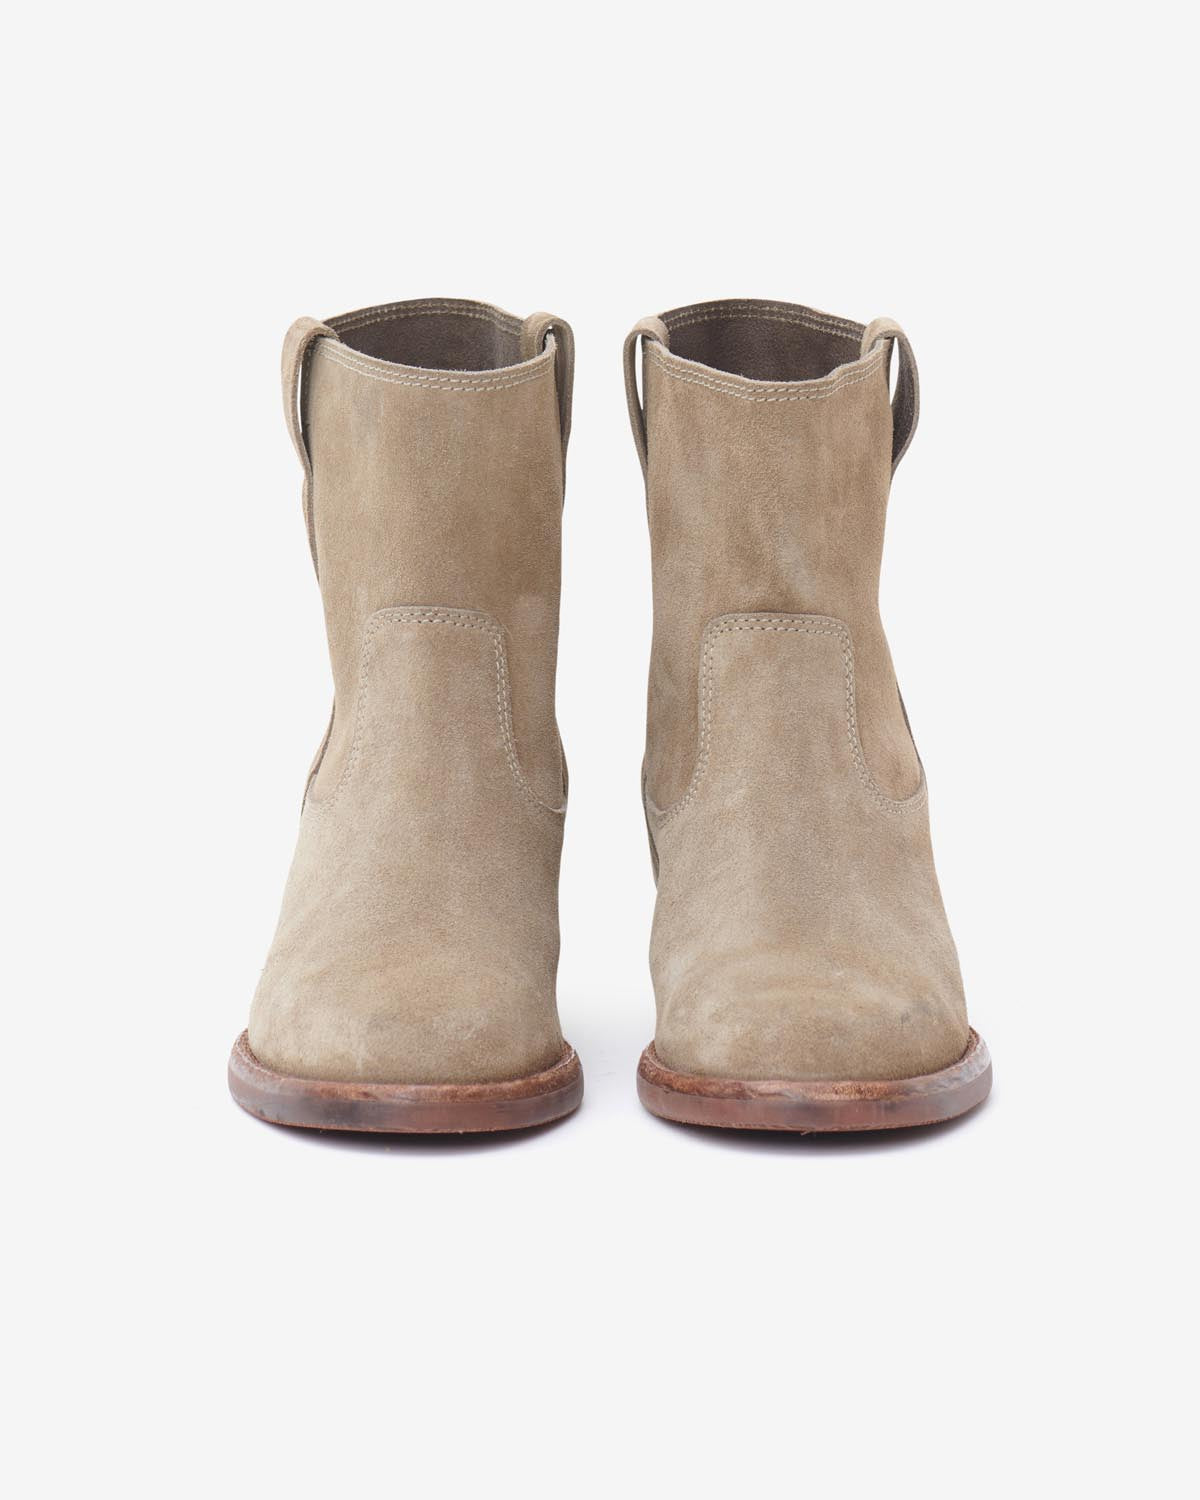 Boots susee Woman Taupe 4